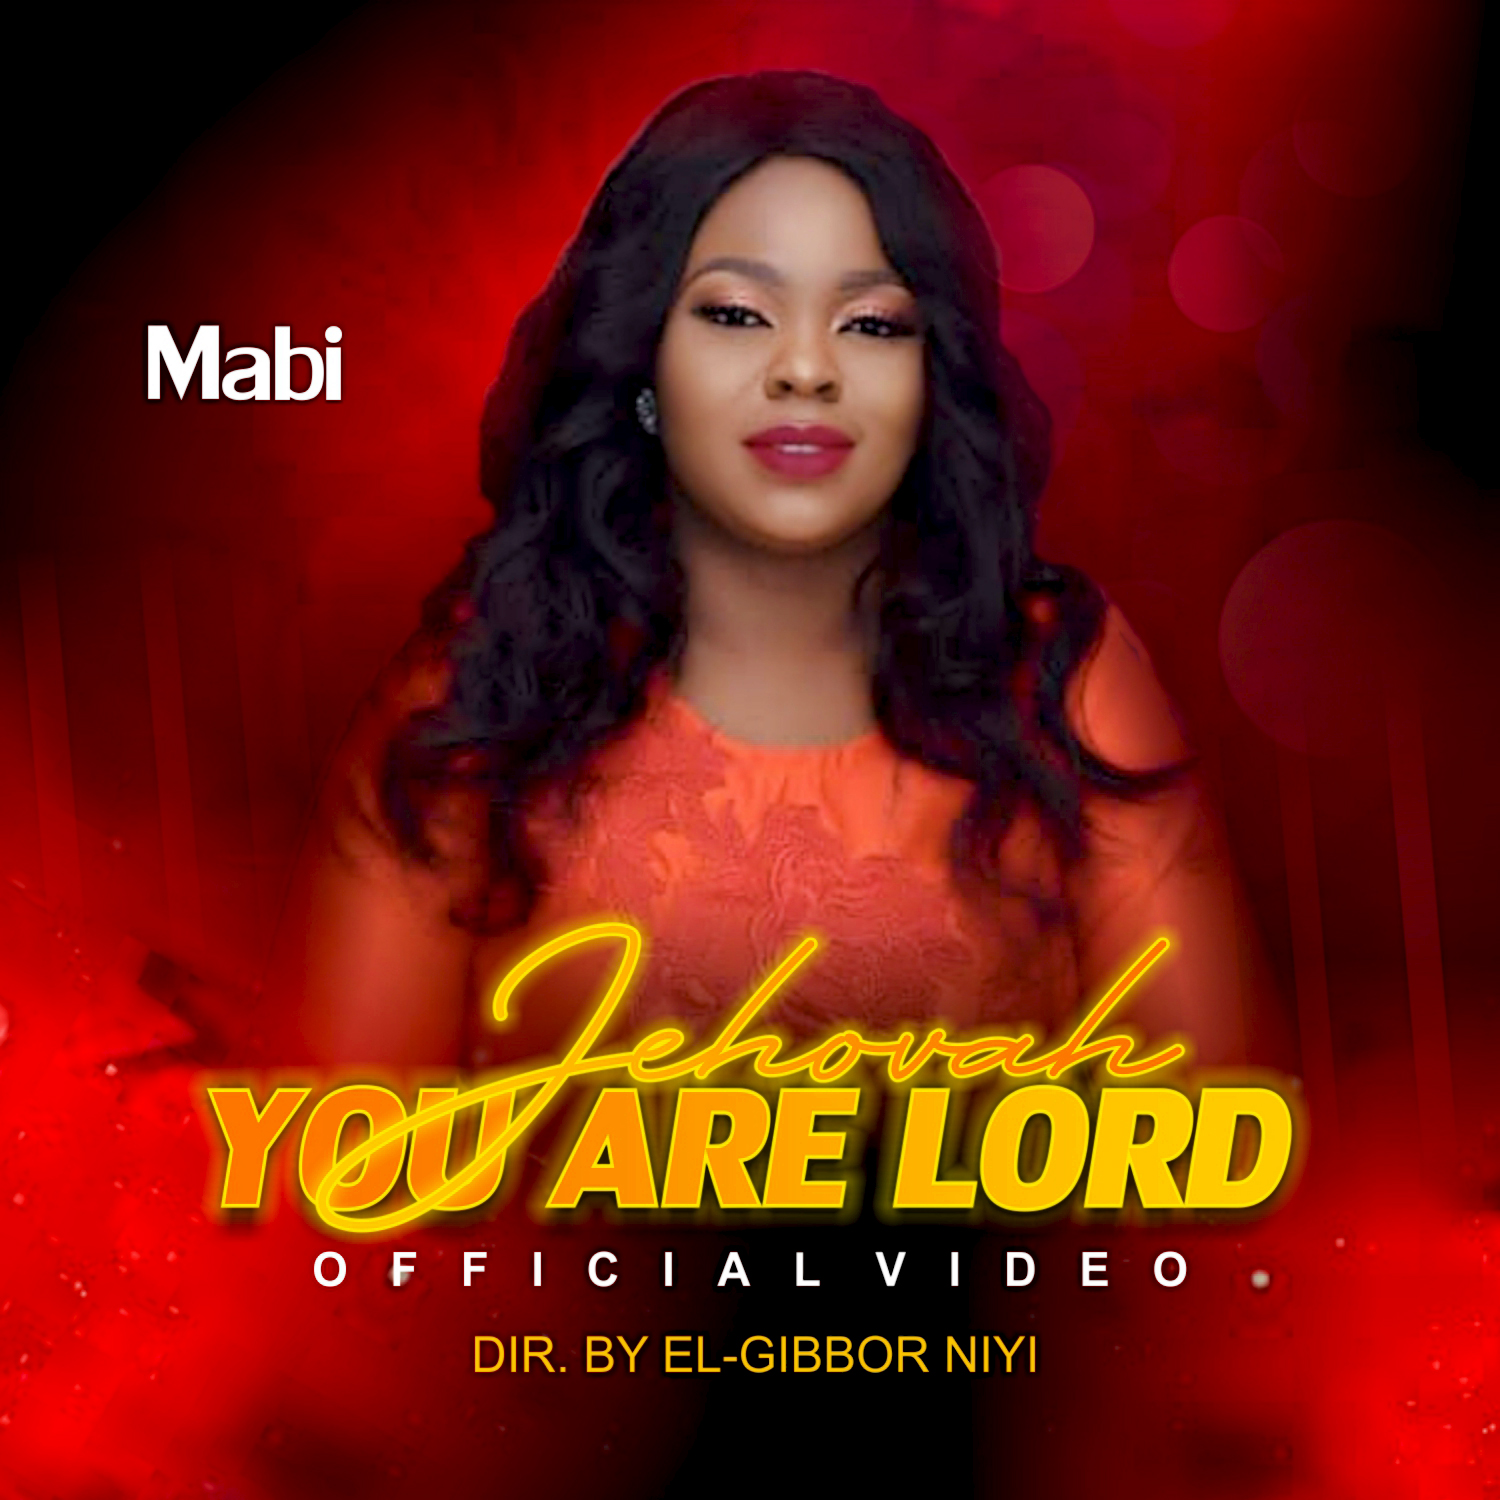 Download Mabi Jehovah You Are Lord mp4